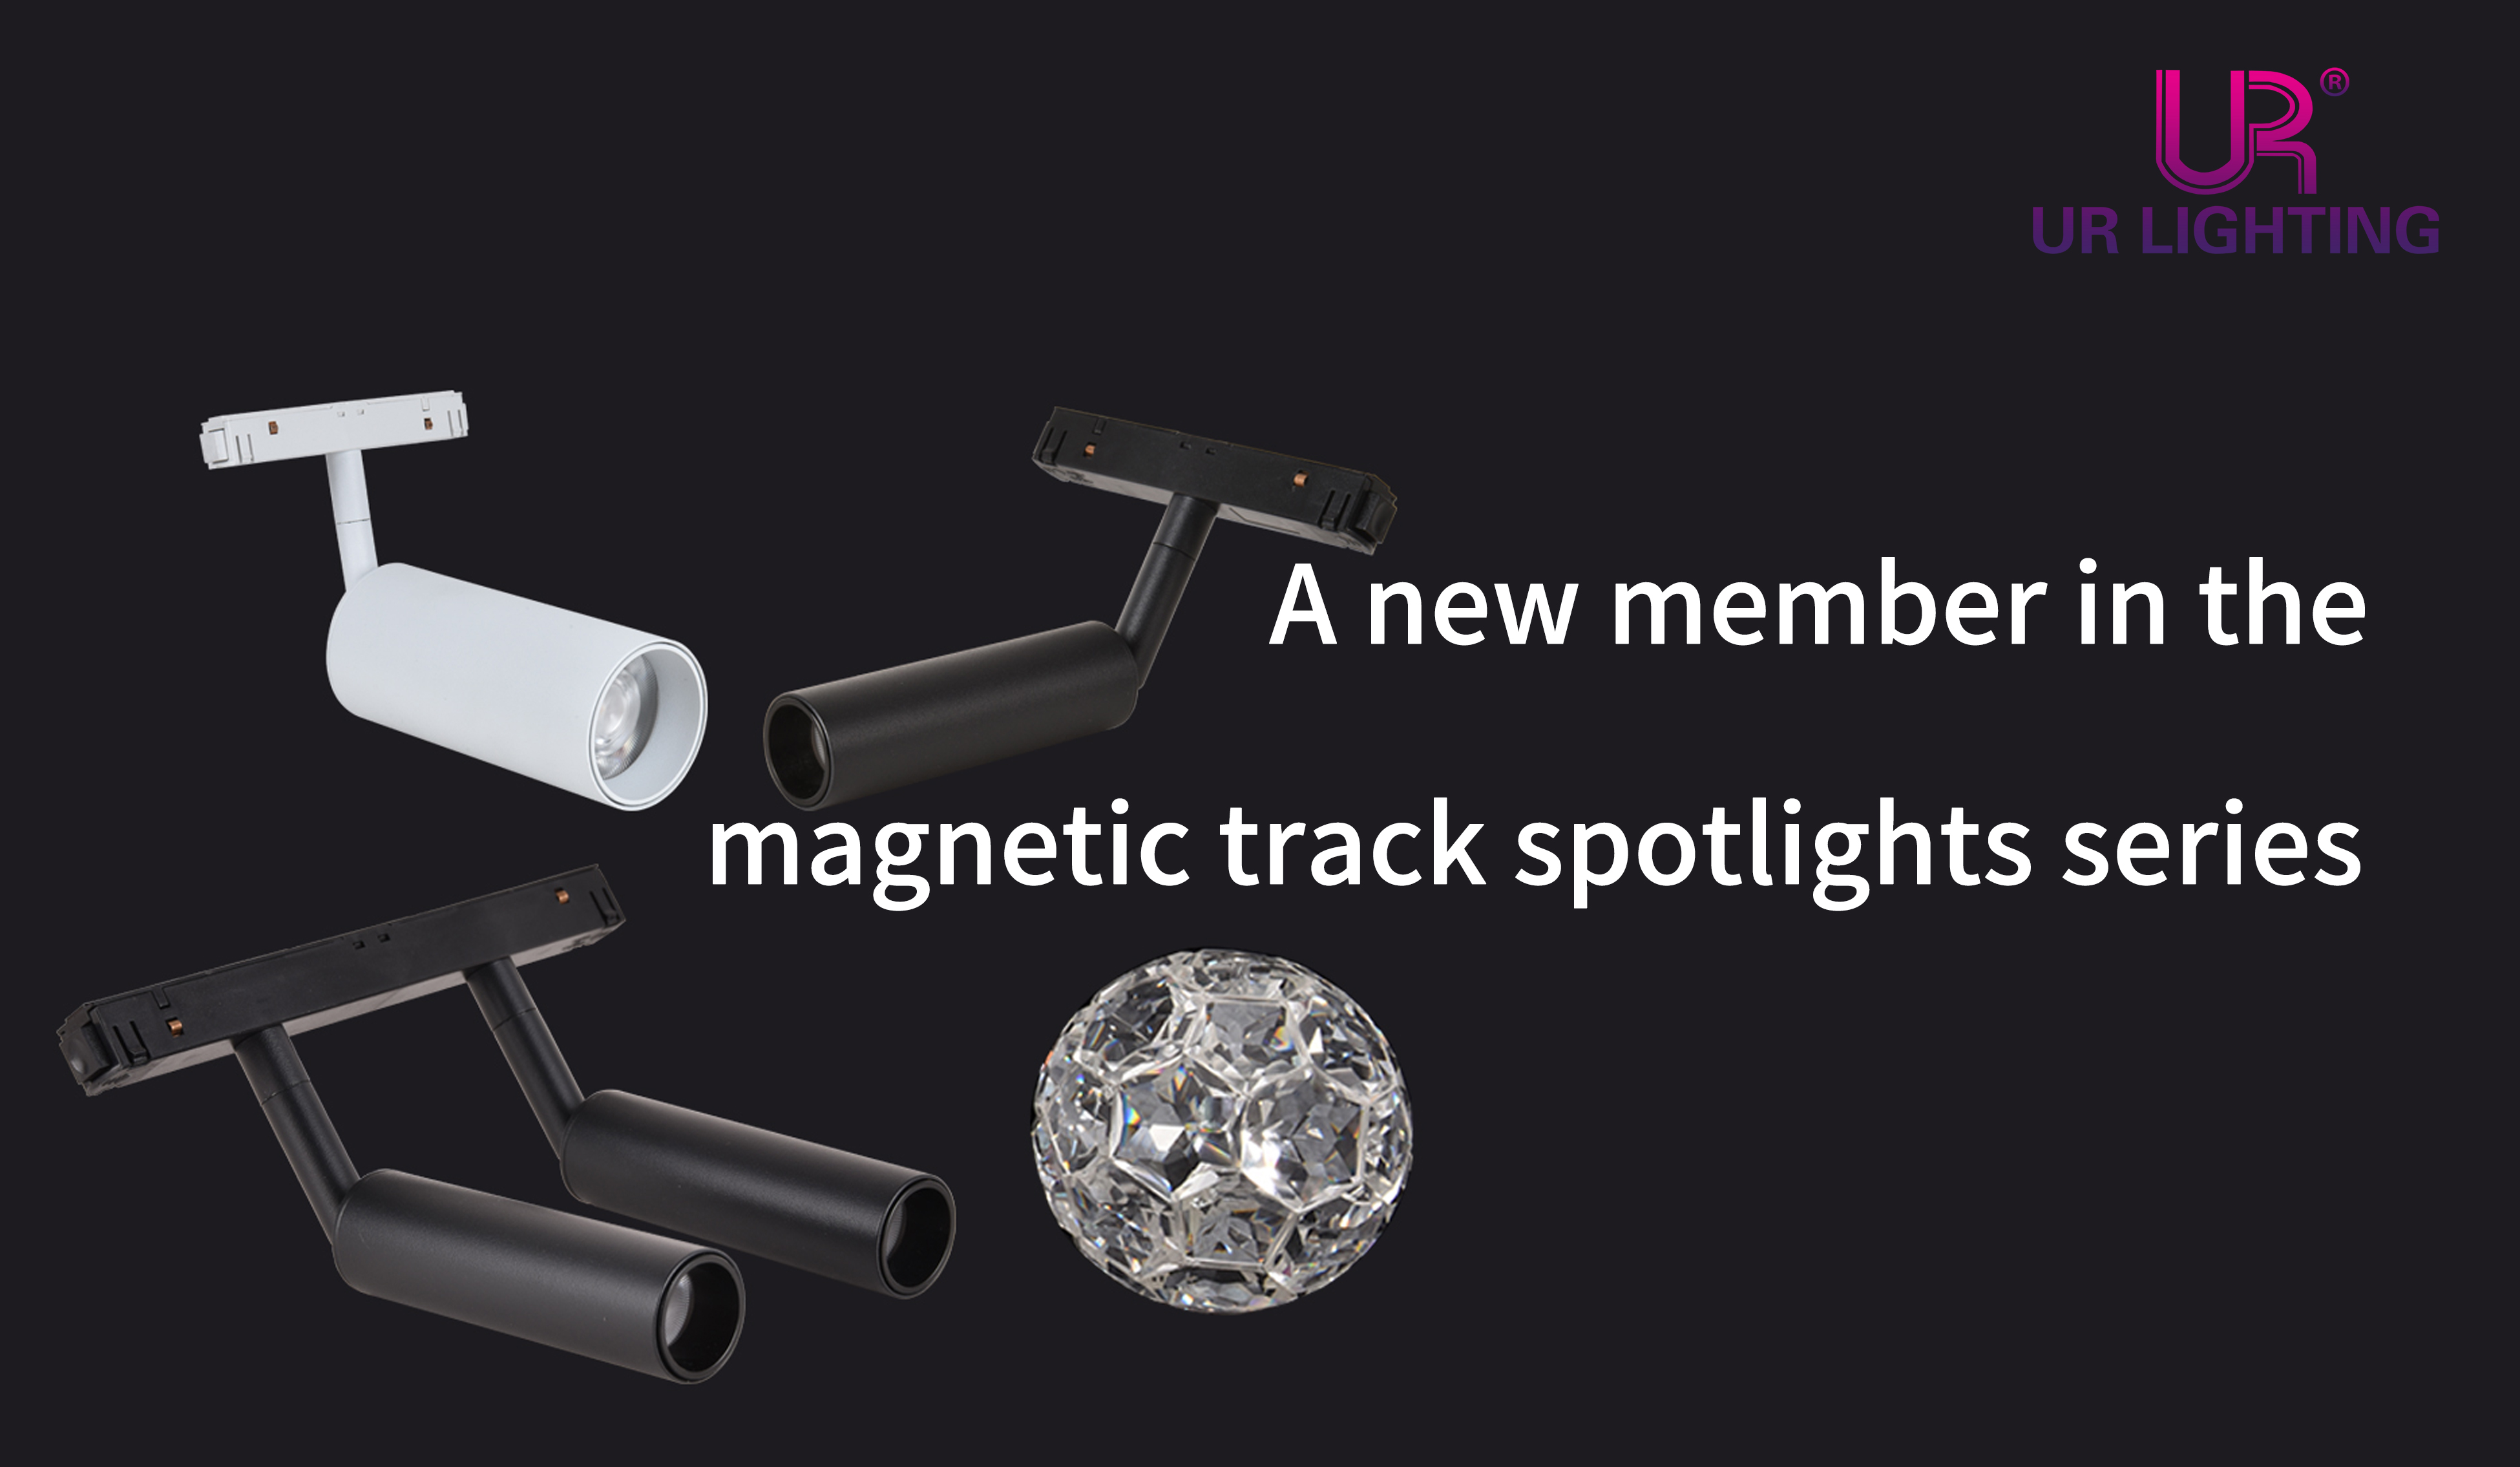 A new member in the A015 magnetic track spotlights series